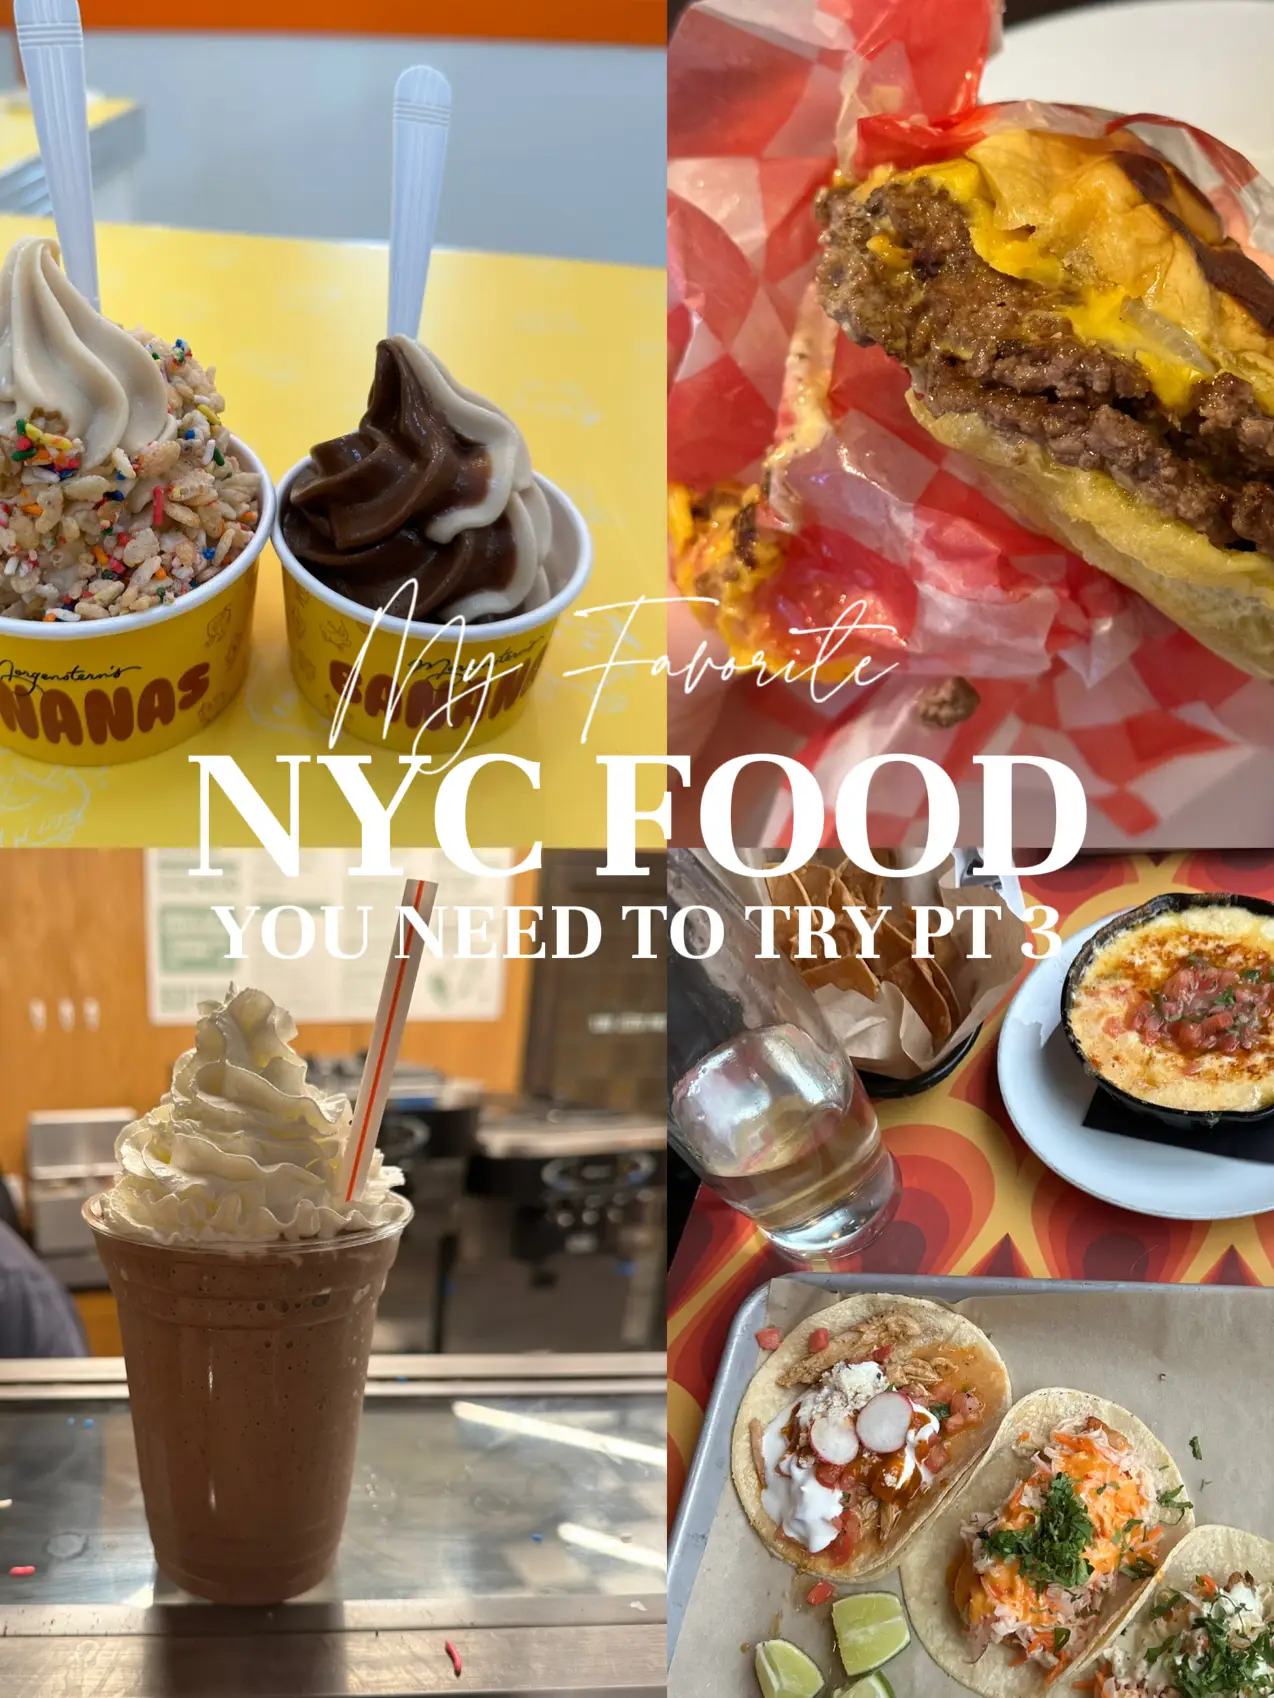 NYC Food You Need to Try Pt 3's images